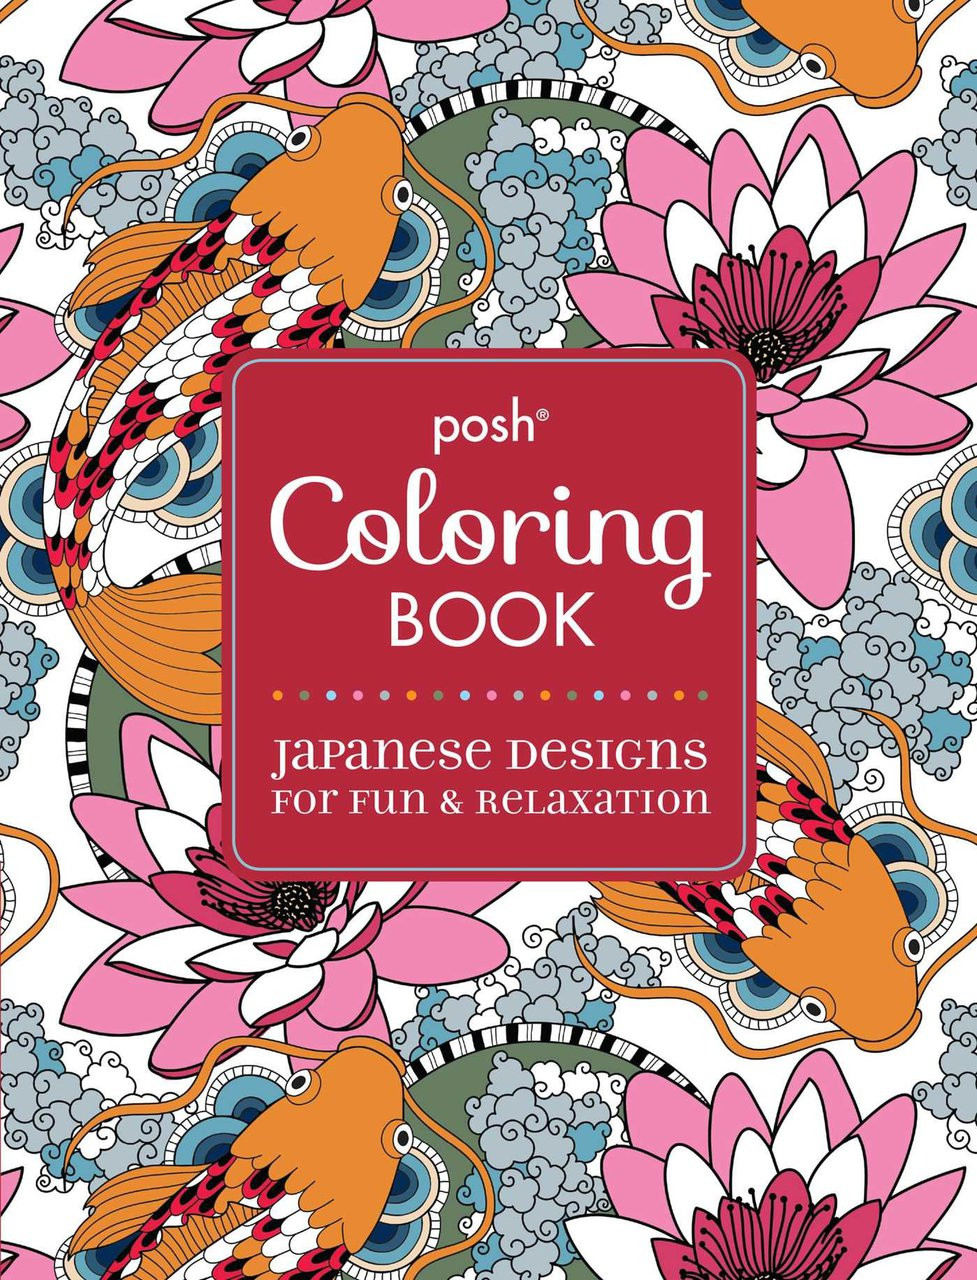 Clearance posh coloring book japanese designs for fun relaxation